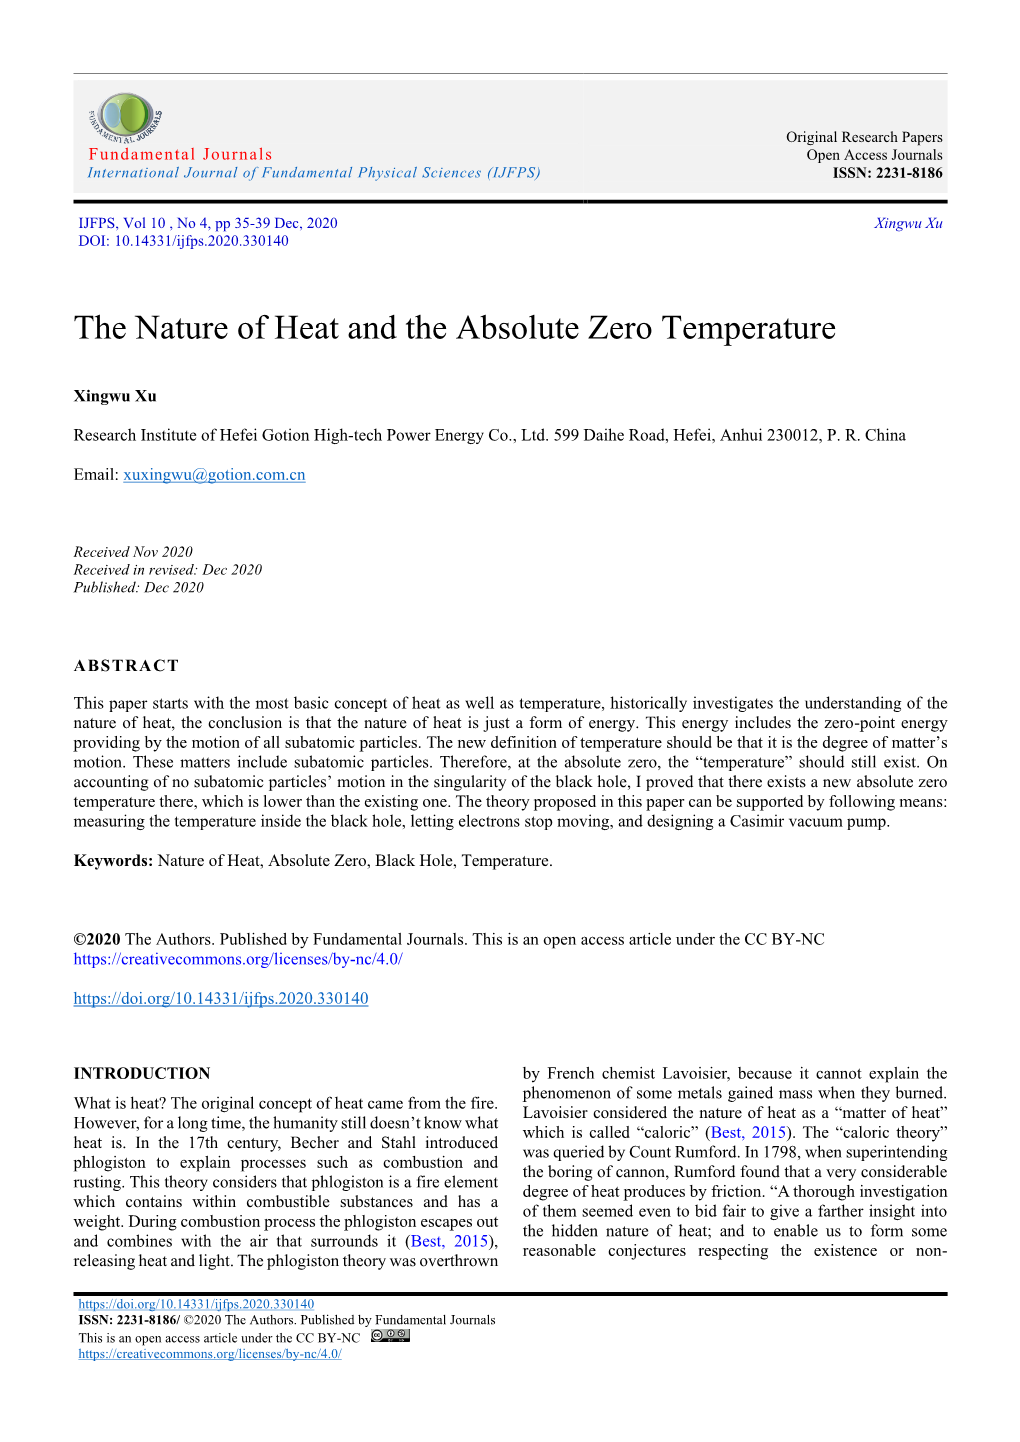 The Nature of Heat and the Absolute Zero Temperature